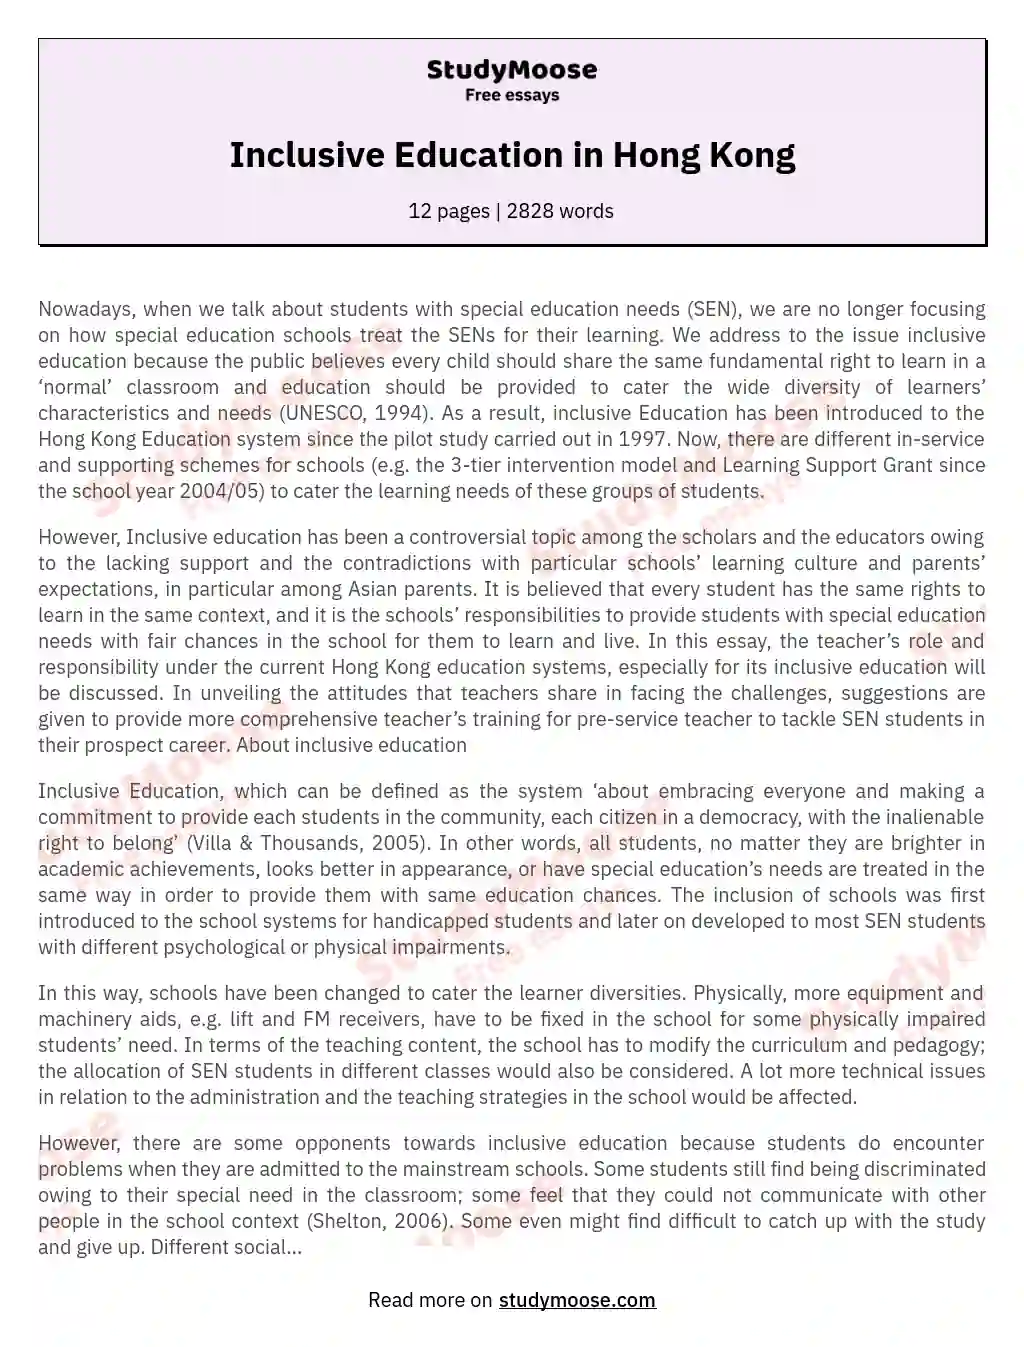 Inclusive Education in Hong Kong essay